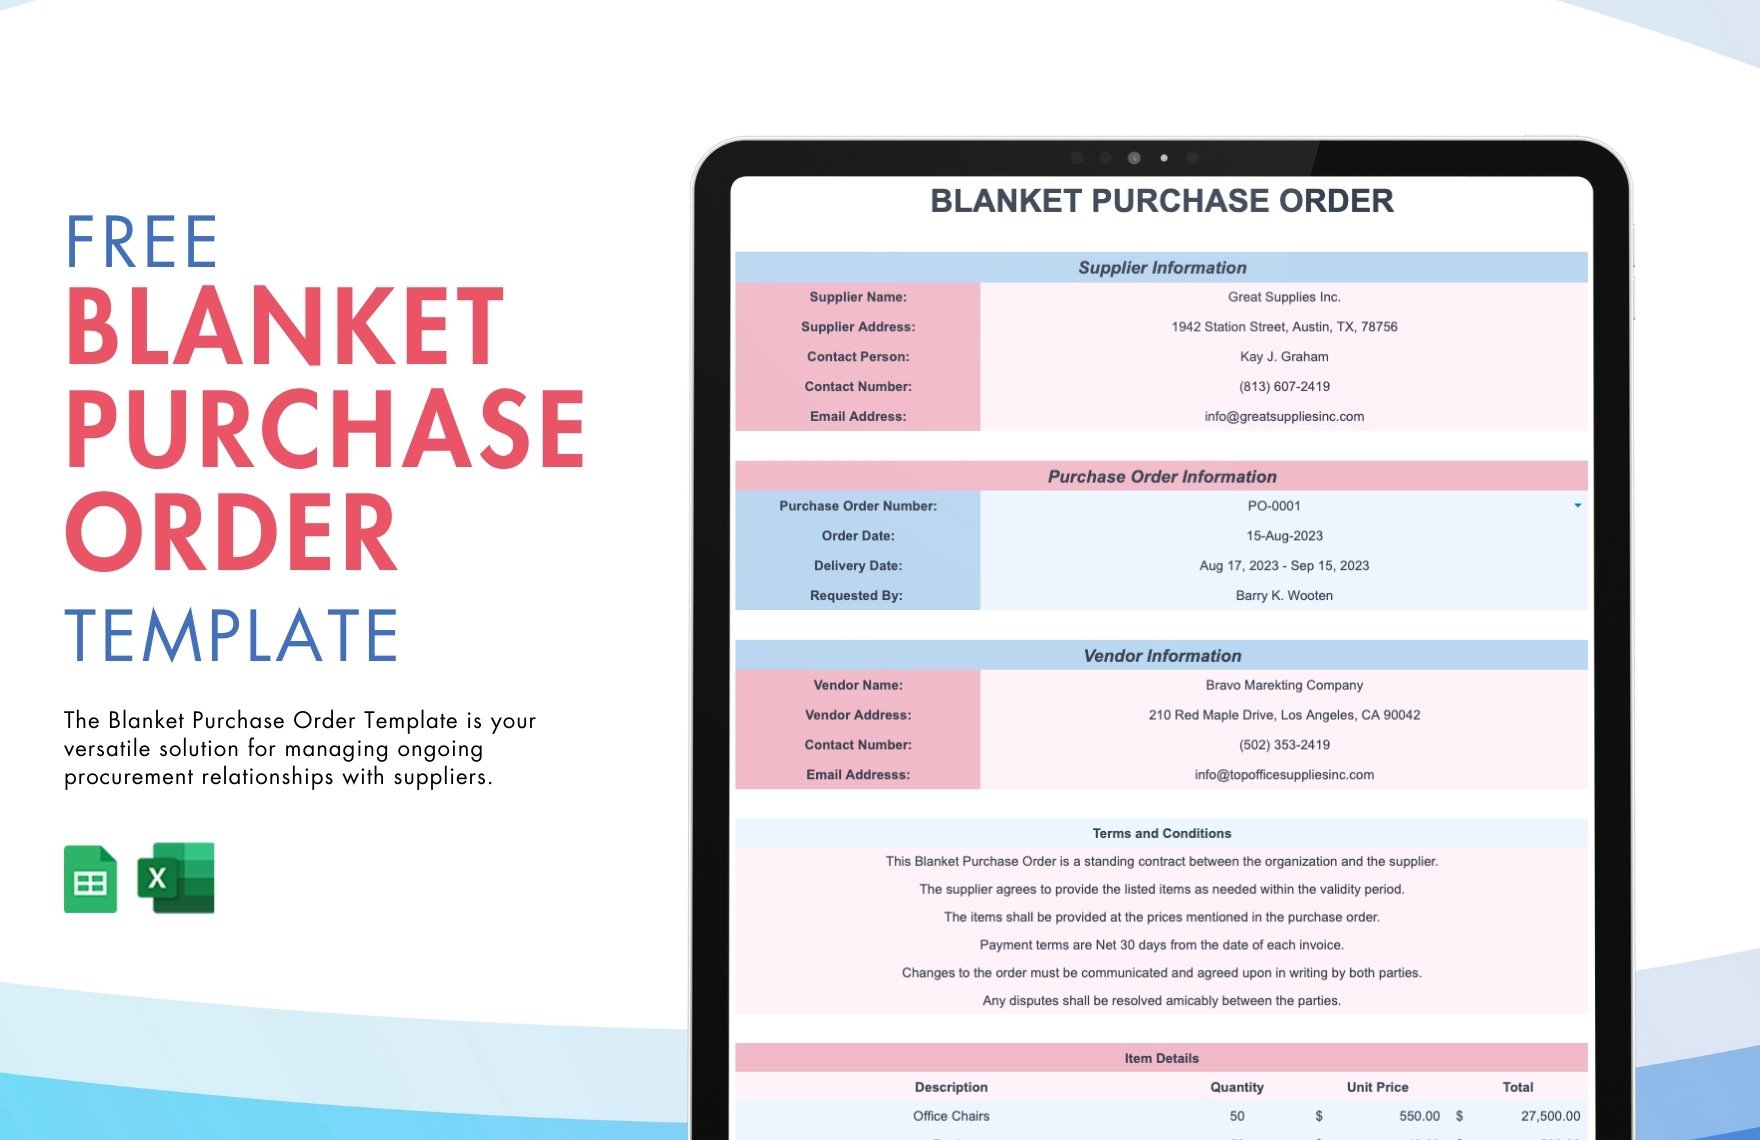 Blanket Purchase Order Template in Excel Google Sheets Download